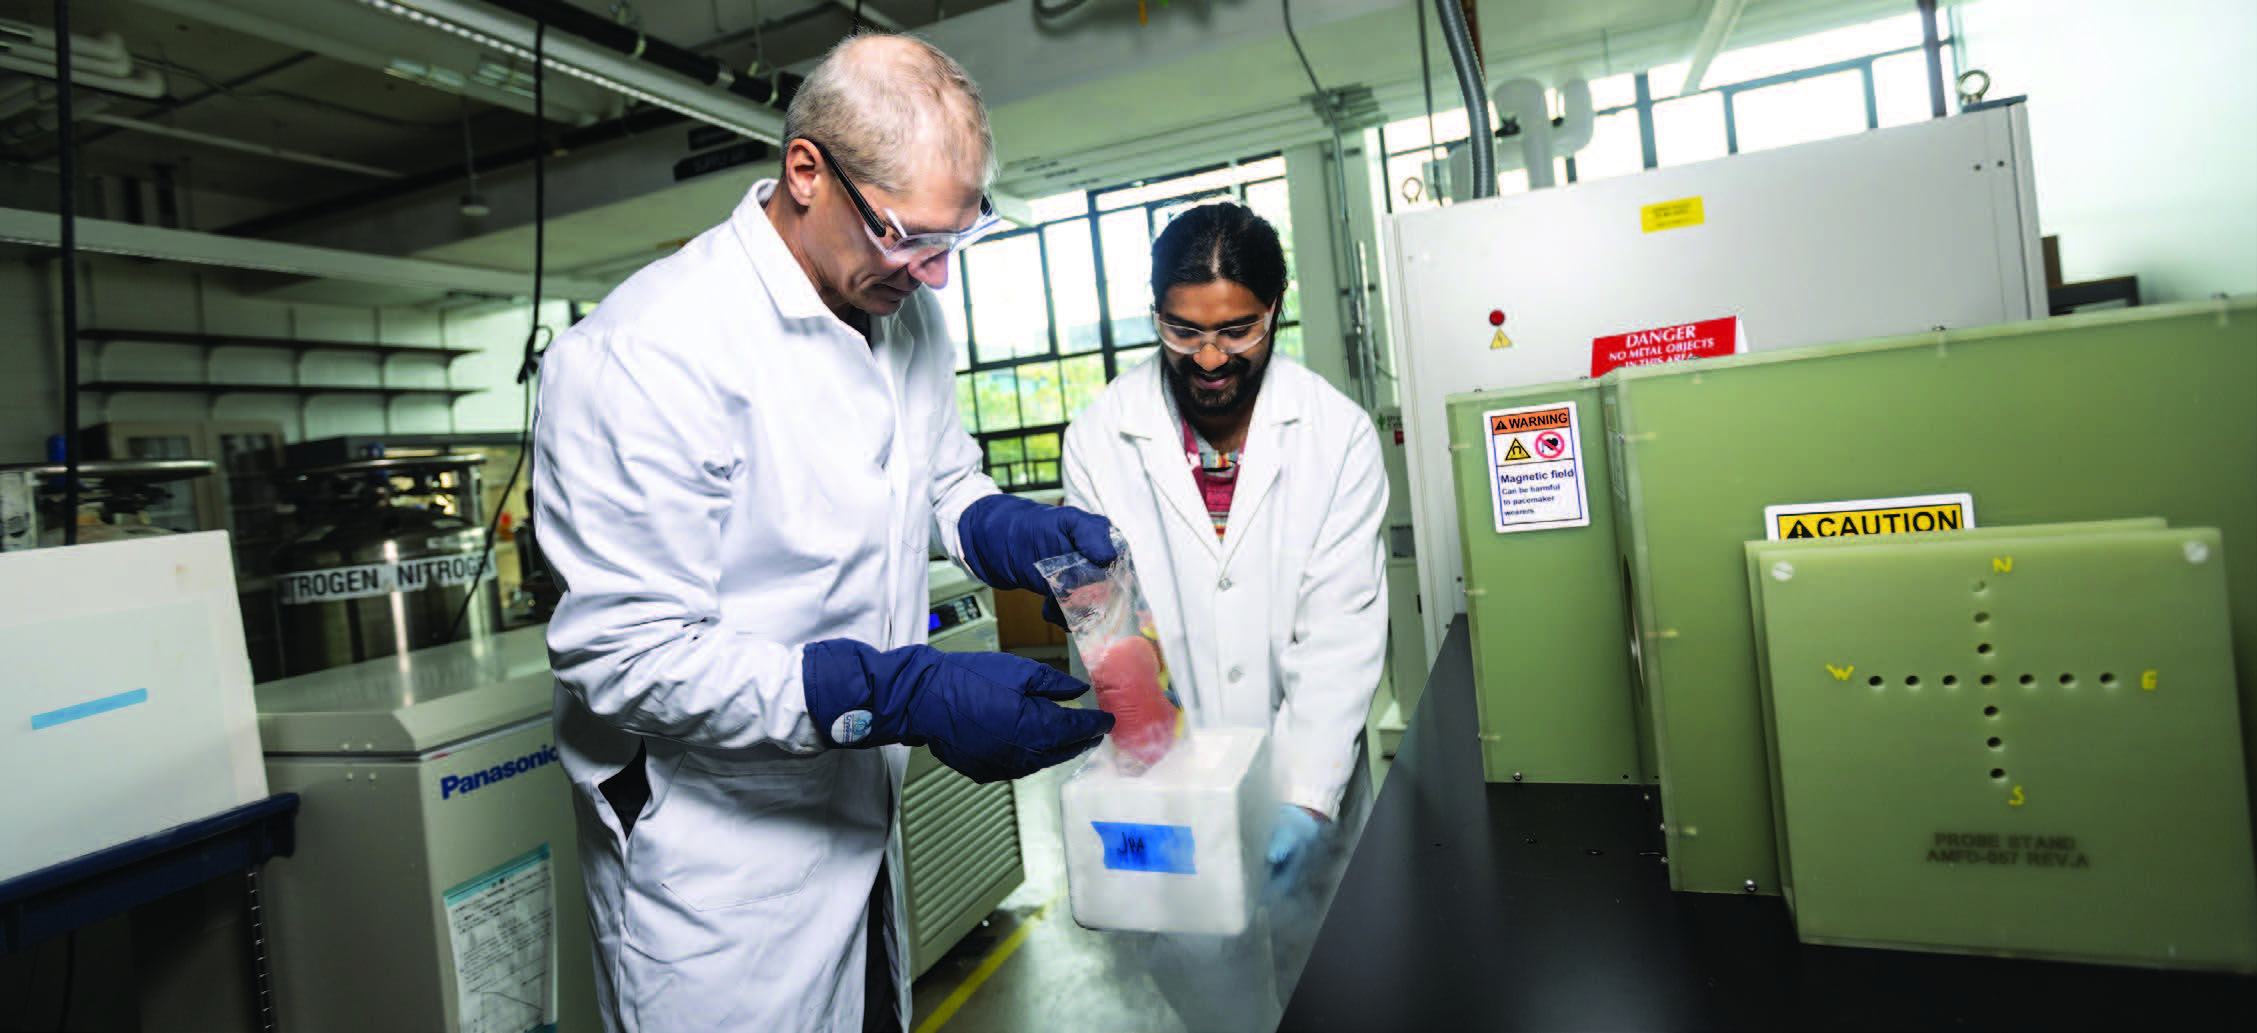 University of Minnesota College of Science and Engineering Professor John Bischof and mechanical engineering Ph.D. student Lakshya Gangwar use one-of-a-kind pieces of equipment to cryopreserve and rewarm cells, tissues and even entire organs. Credit: Rebecca Slater